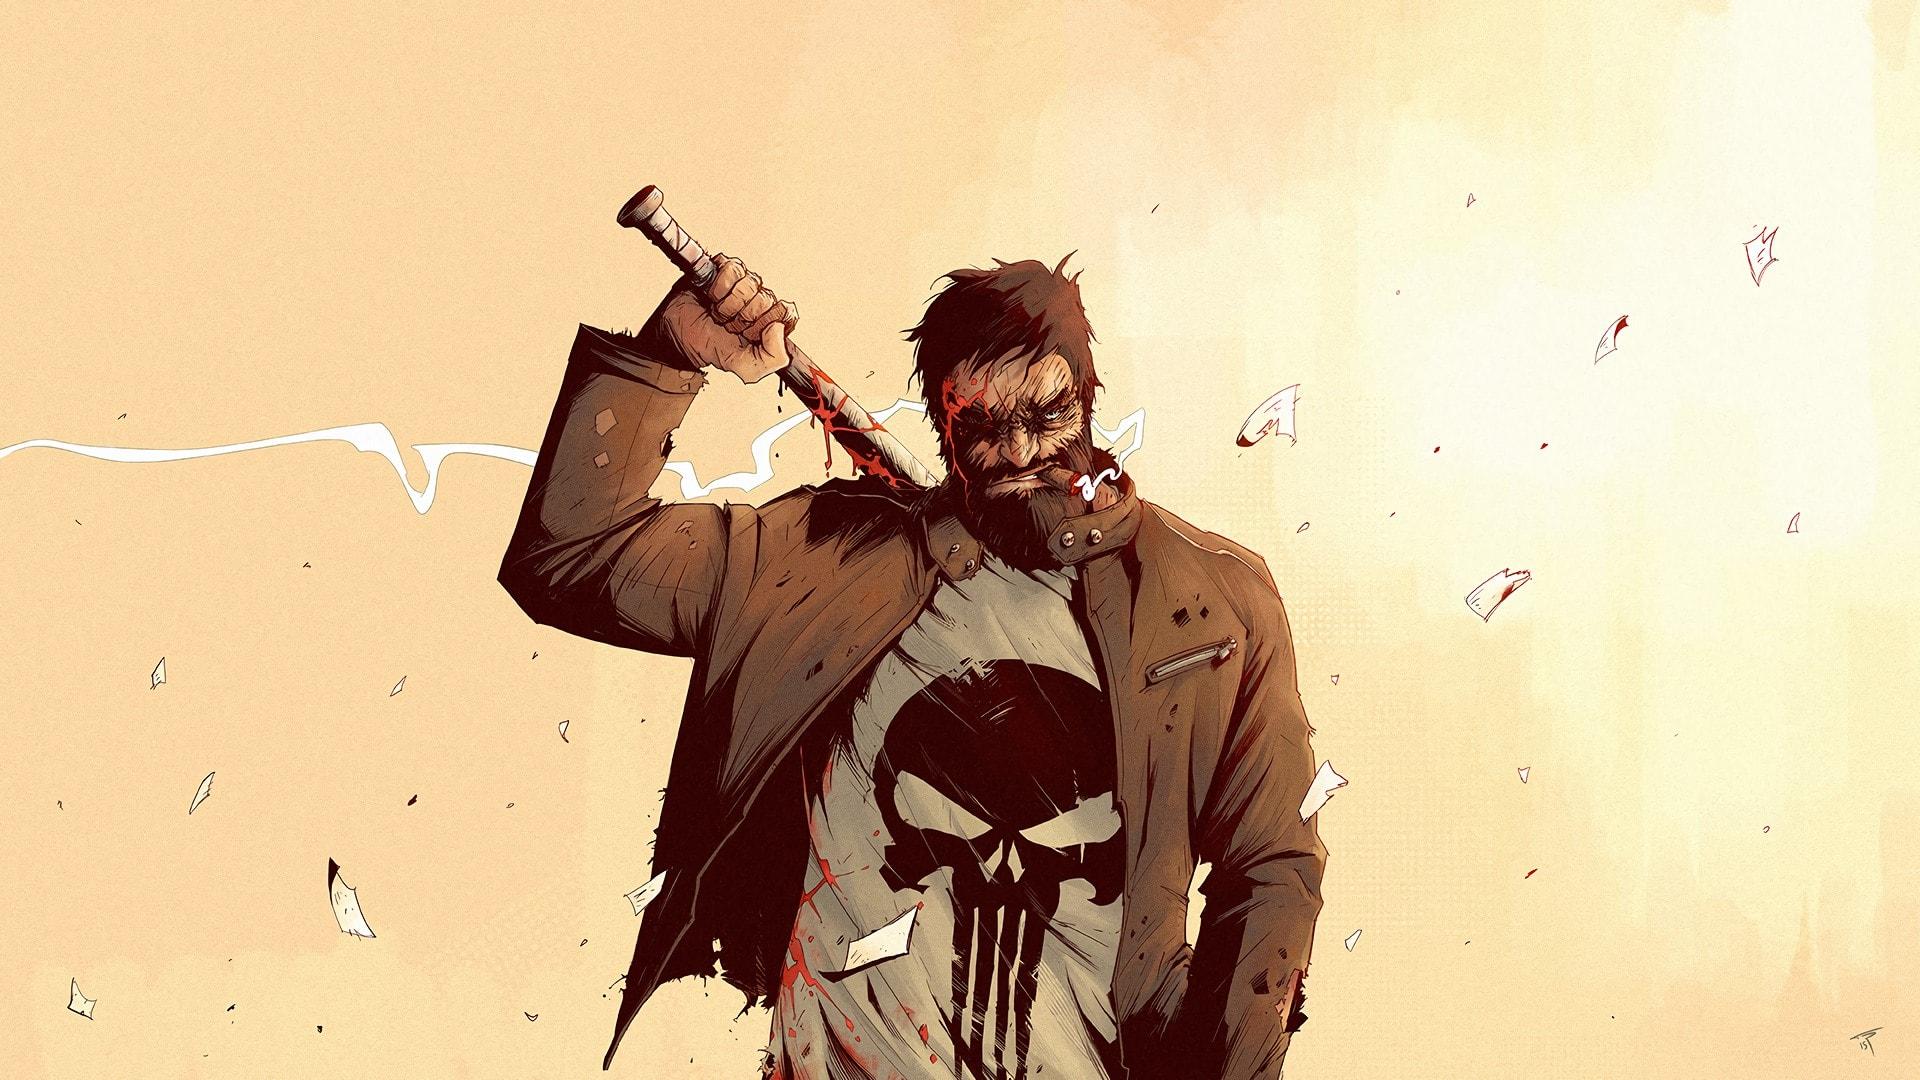 The Punisher Marvel Comics Artwork Wallpaper and Free